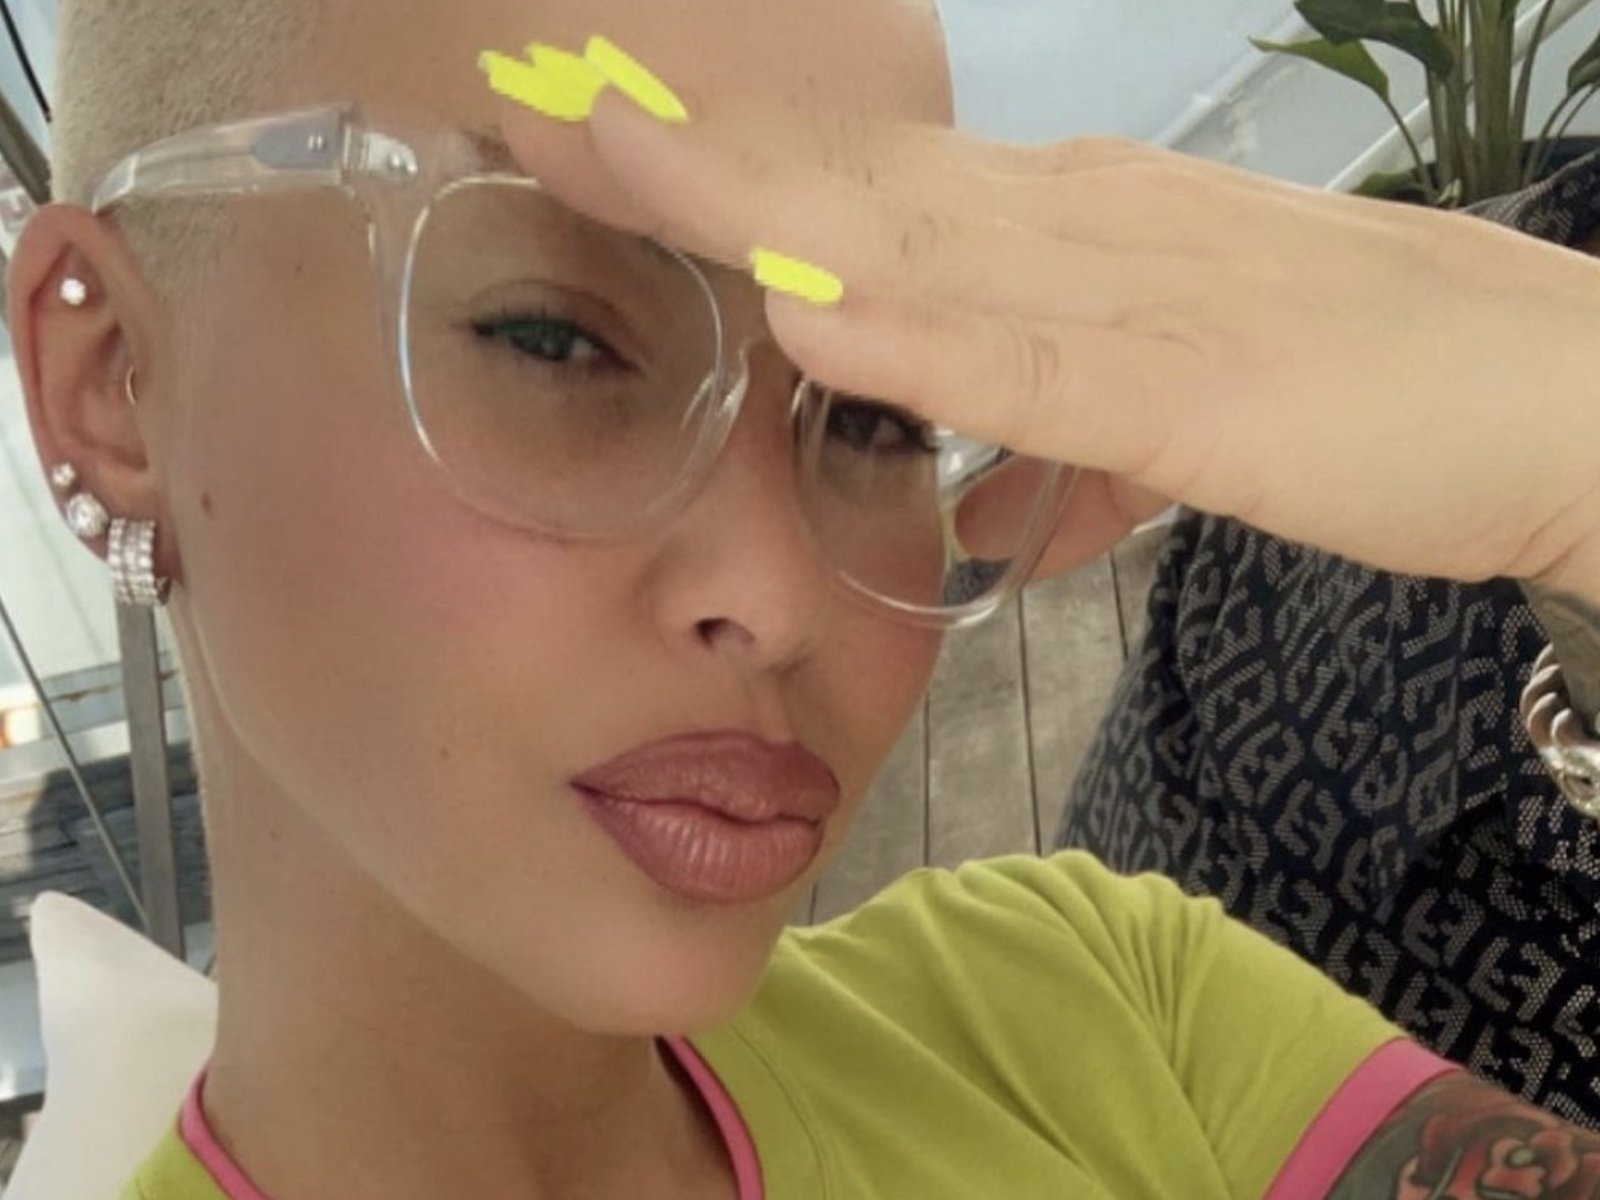 Amber Rose S Bald Headed Selfie Flexing Is Needed — Attack The Culture